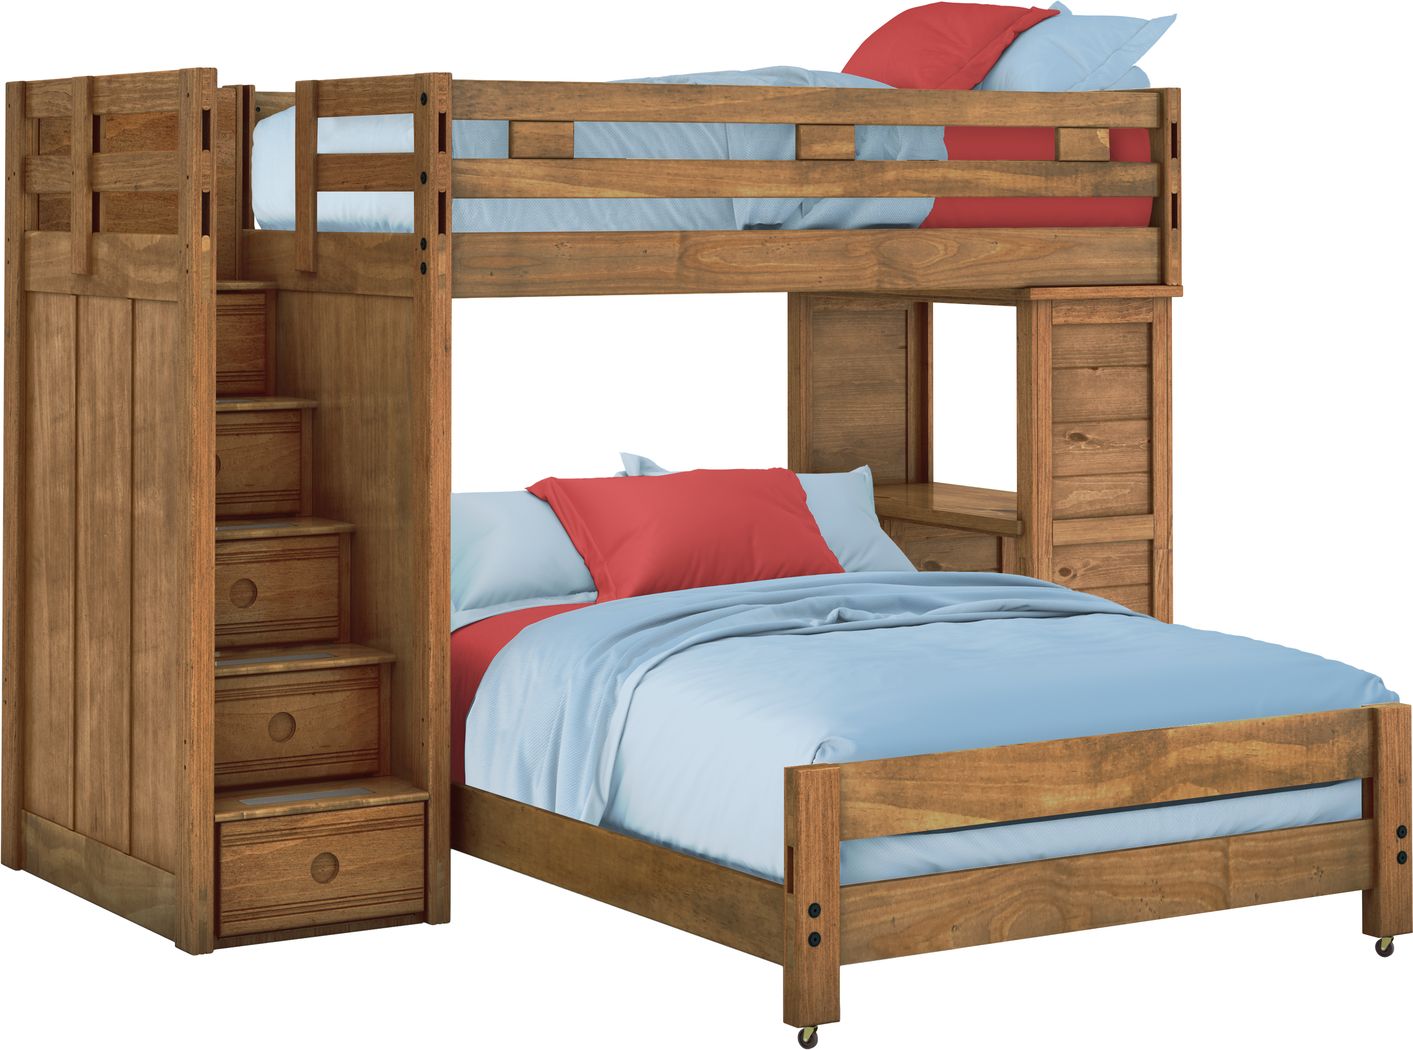 Bunk Beds With Steps, Wooden Bunk Beds With Stairs